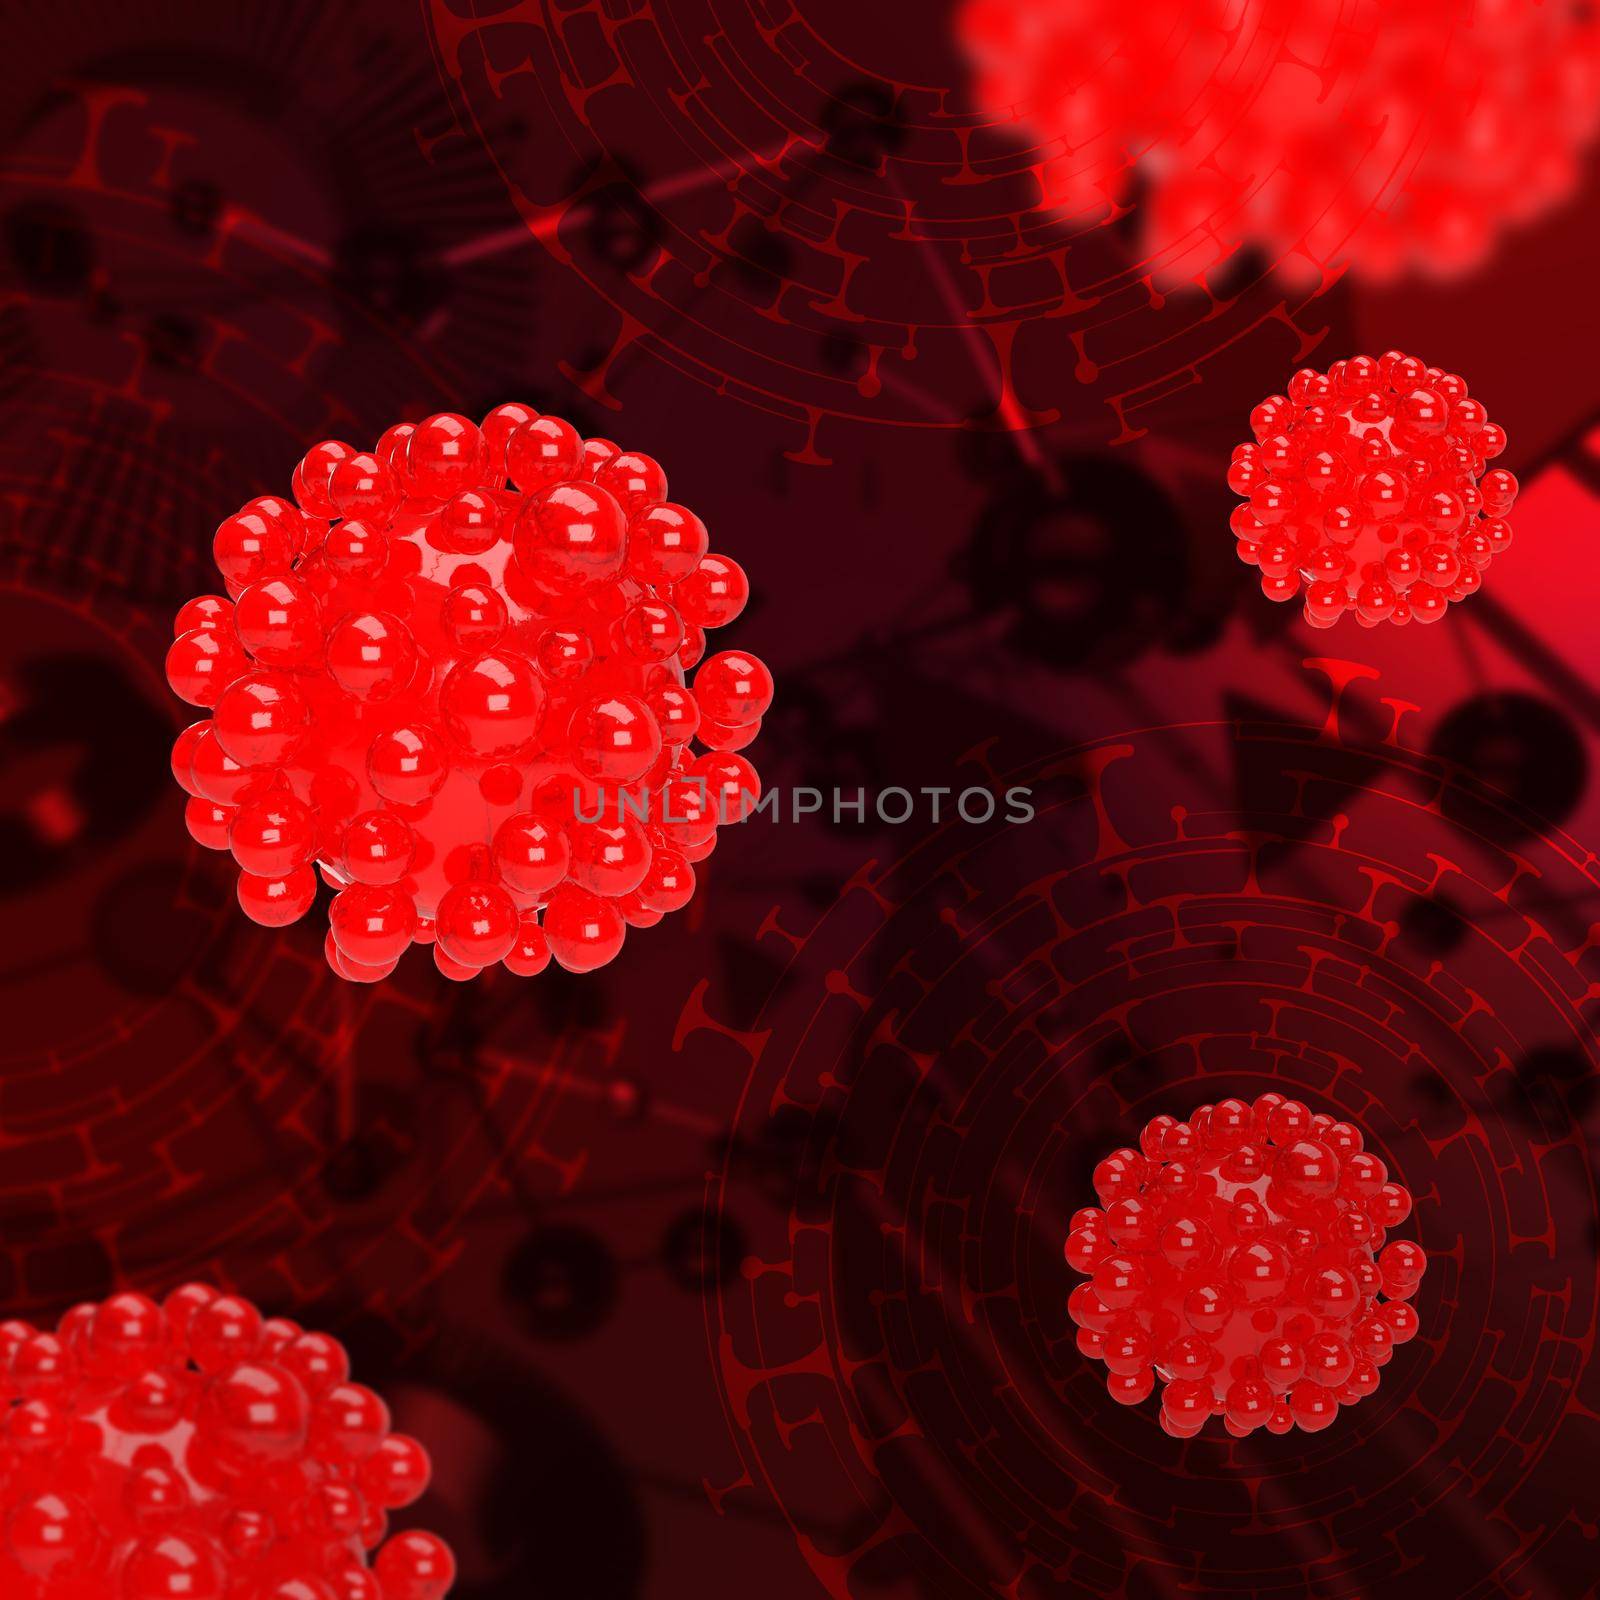 Medical geometric microbiology particle elements background